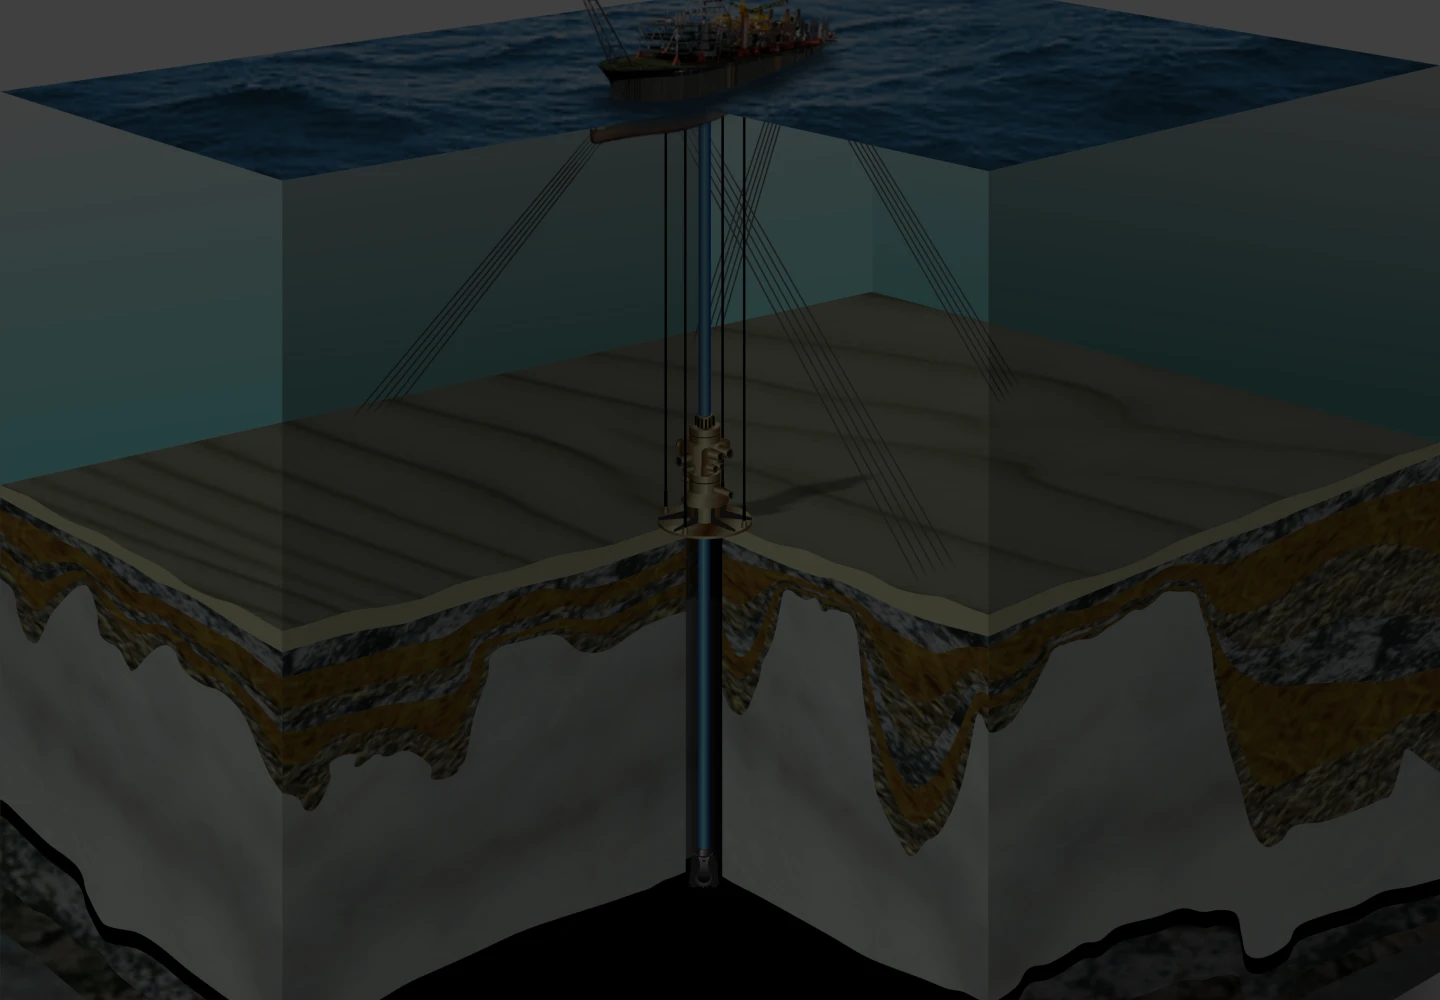 3D illustration showing the several geological layers until the pre-salt layer is reached.